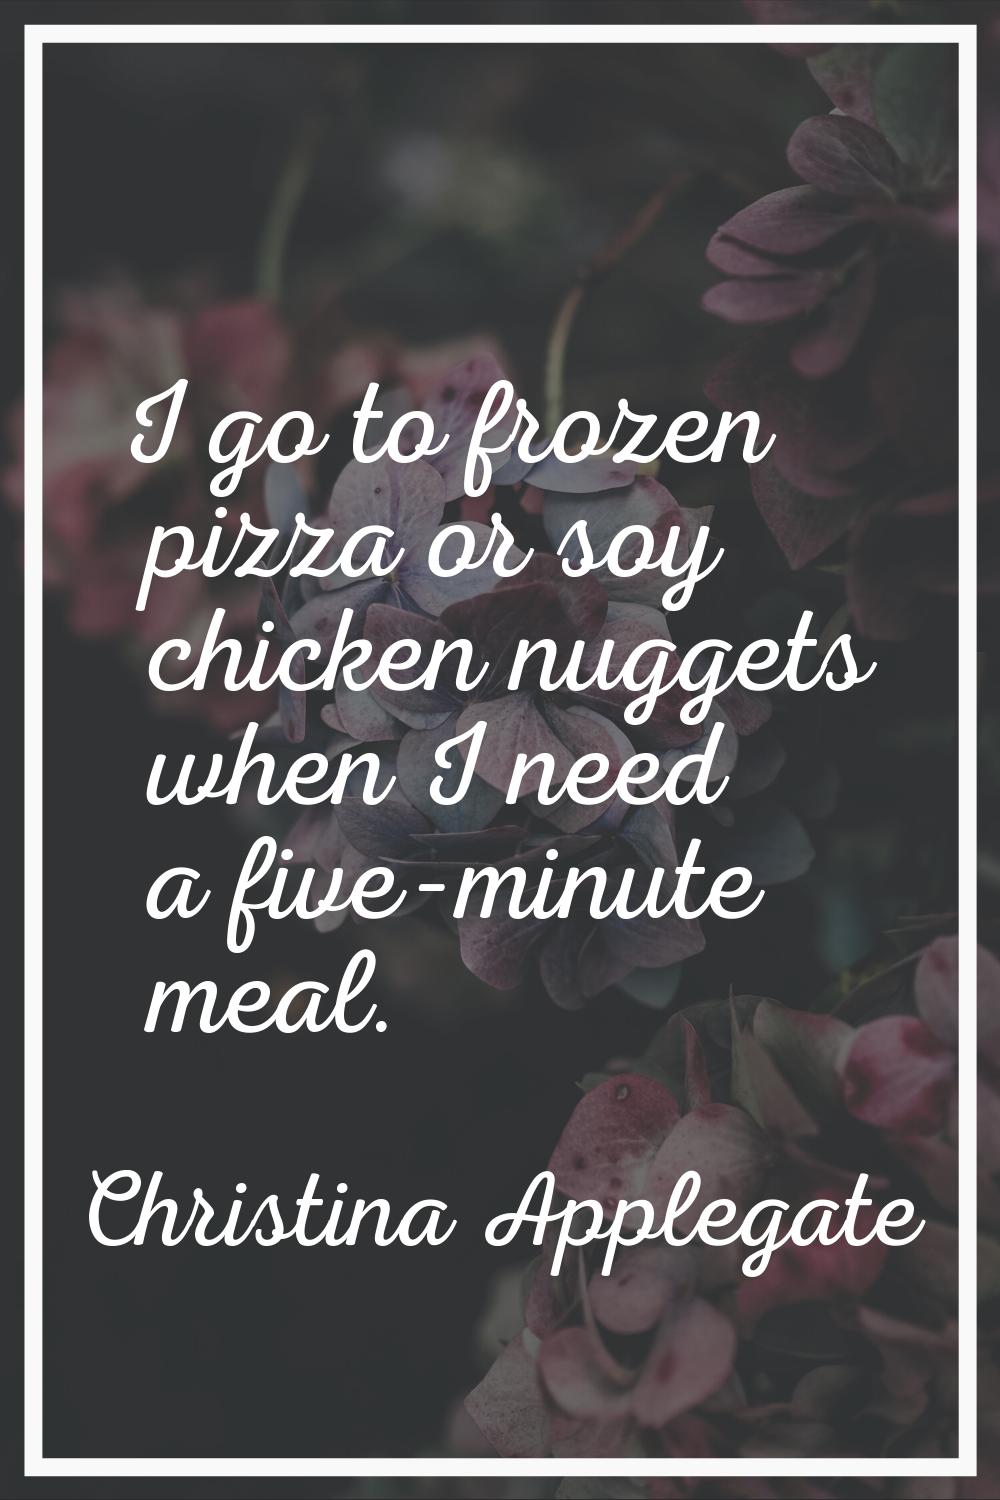 I go to frozen pizza or soy chicken nuggets when I need a five-minute meal.